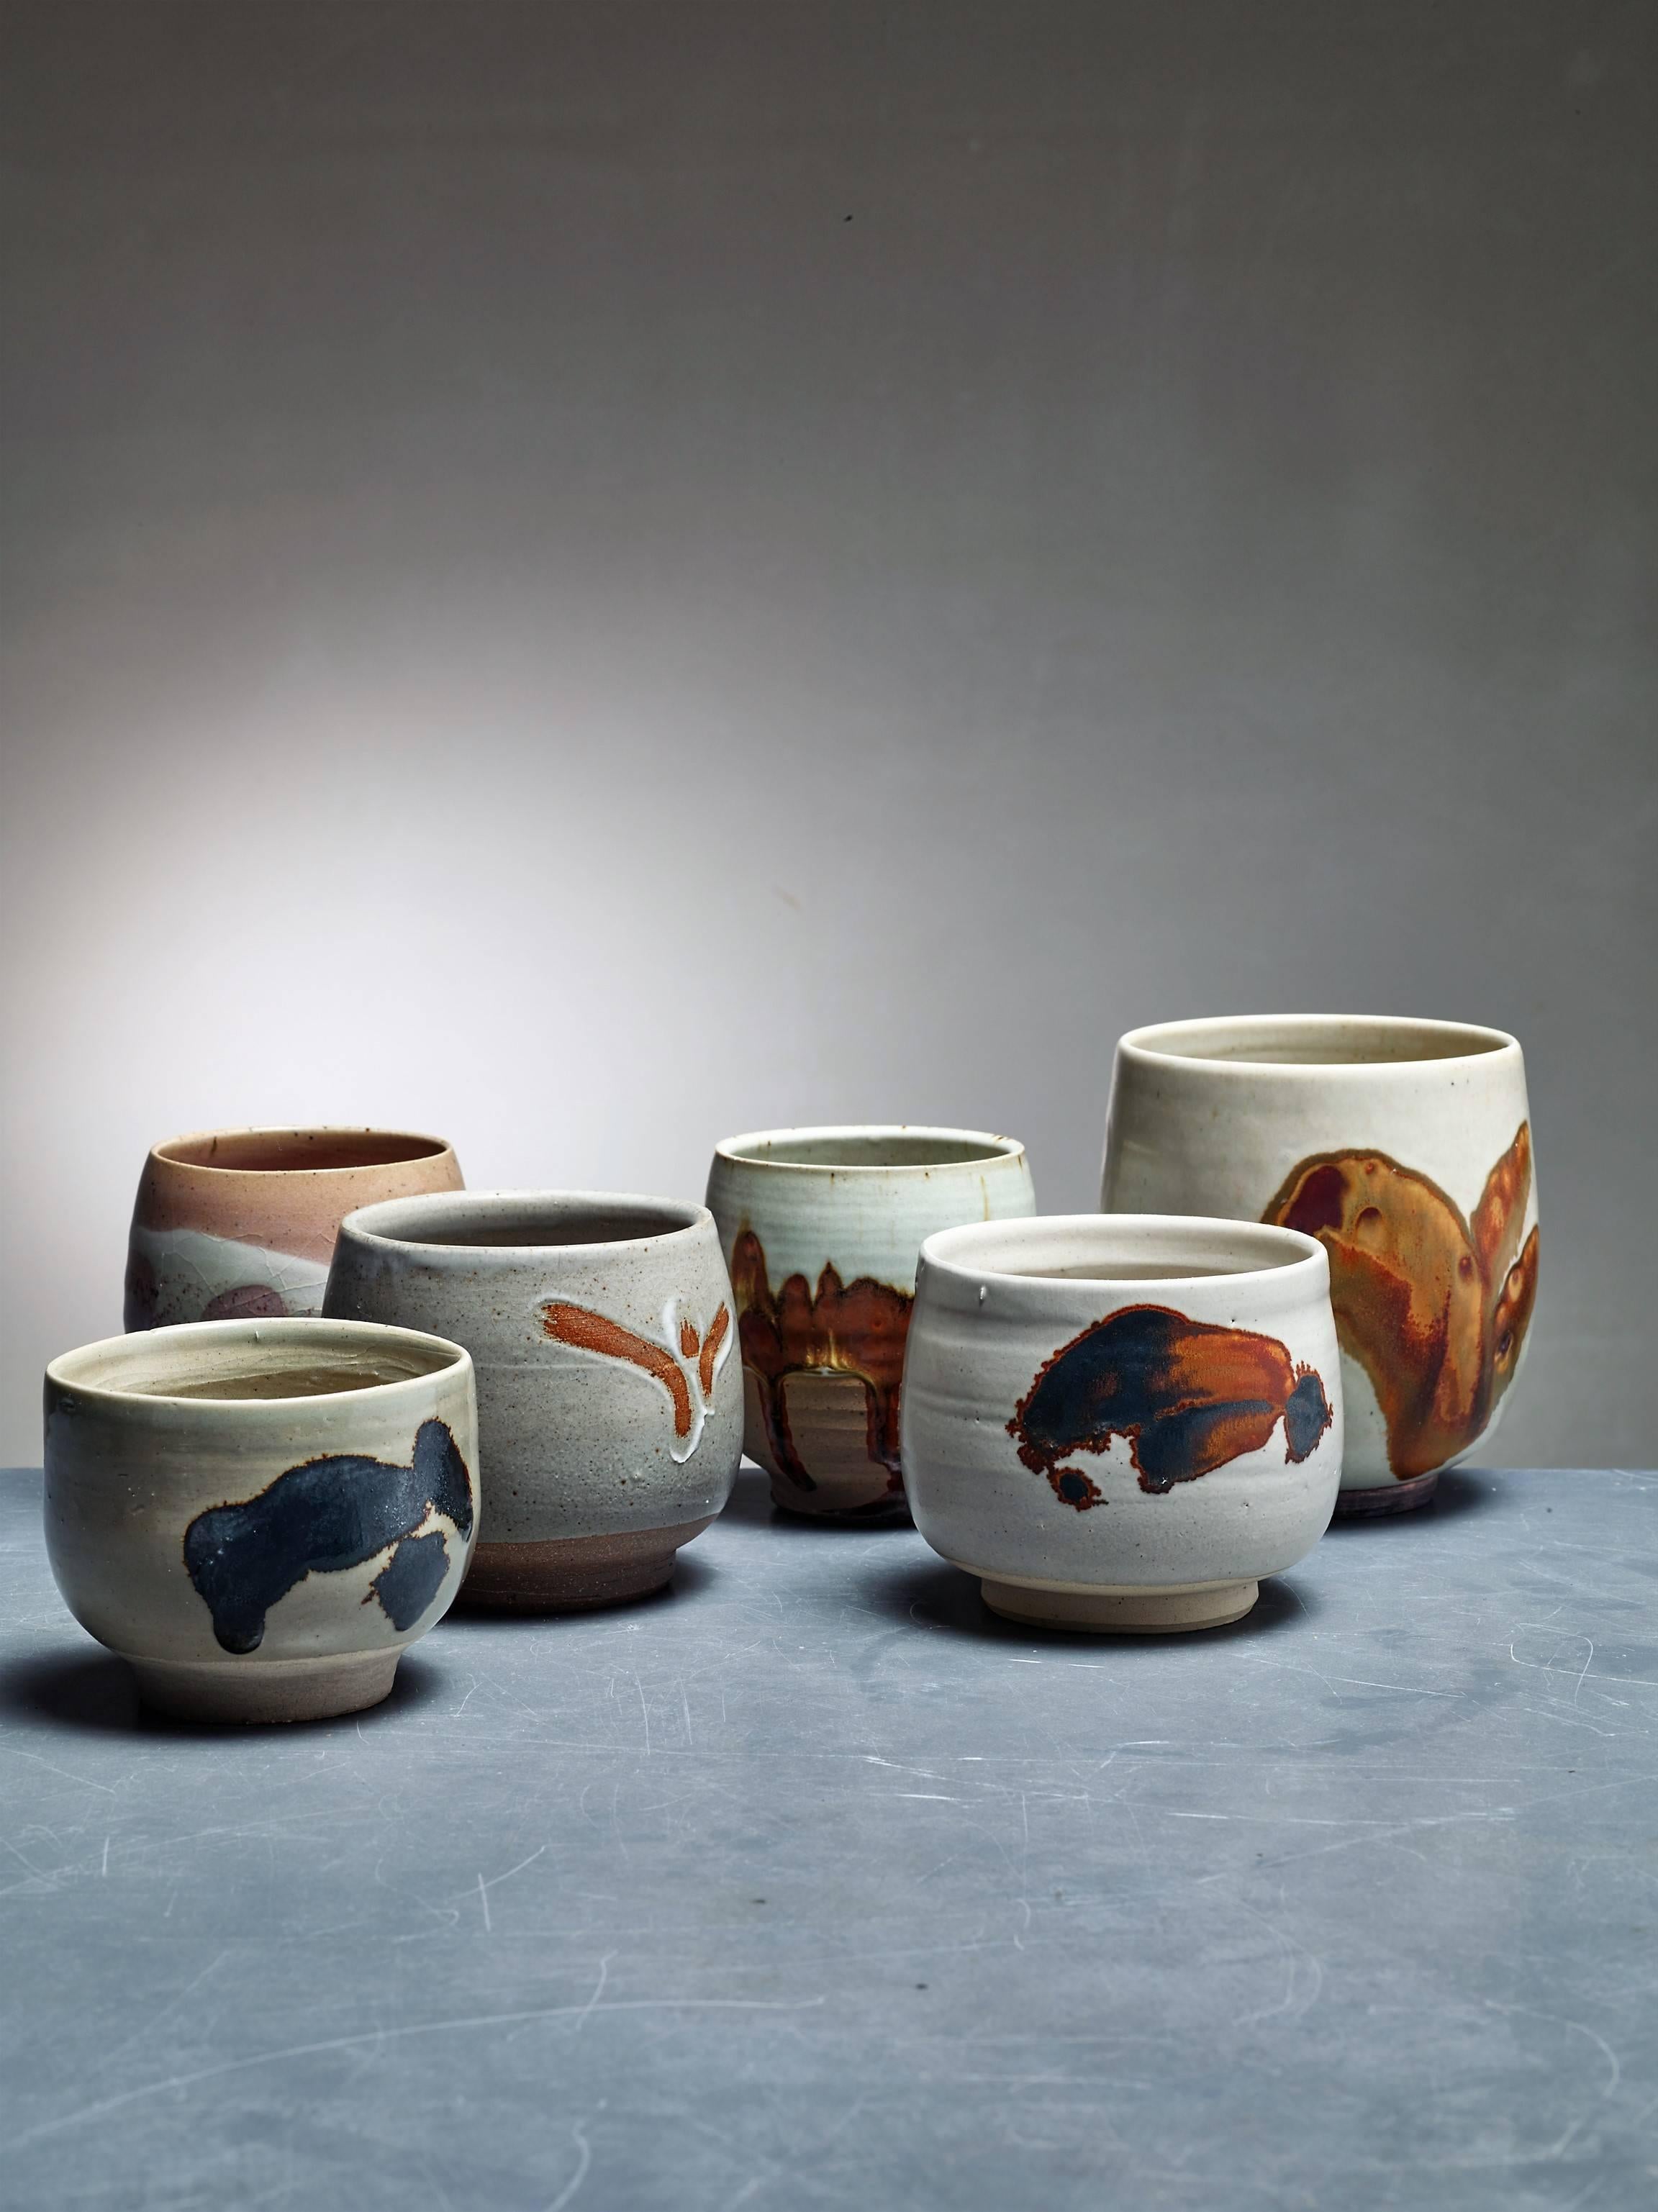 A set of six ceramic vases with an earth-tone glaze finish and abstract figures, by Rolf Palm.

The pieces are signed by Palm, some with the year of production. Measures: The shortest vase is 8.5 cm (3.3 inch) high with a 10.5 cm (4 inch) diameter.